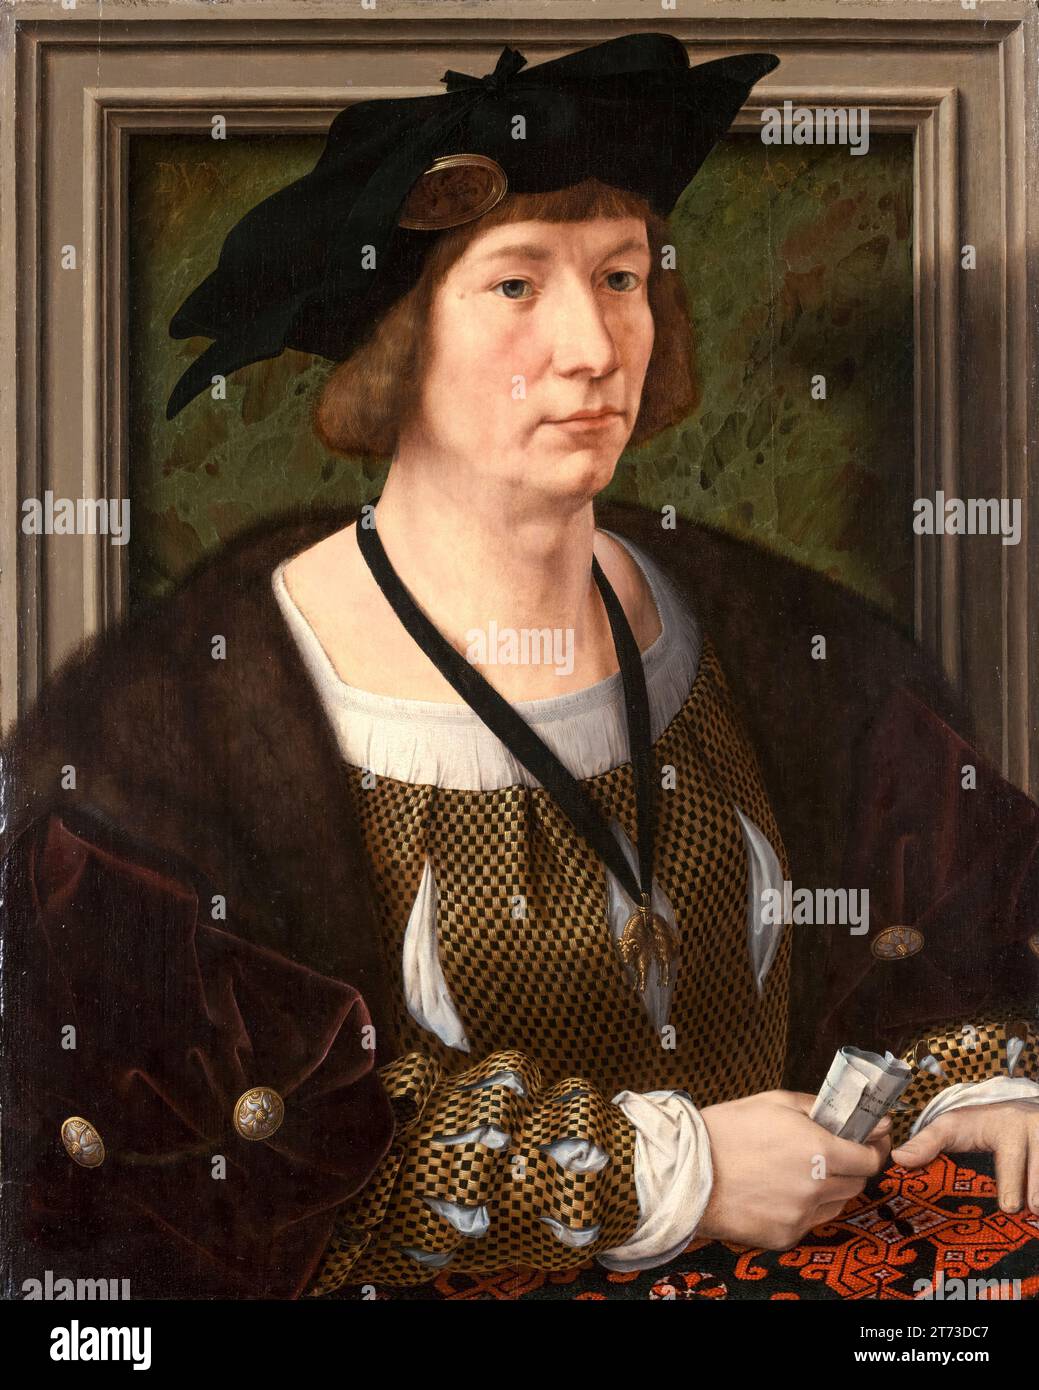 Henry III of Nassau-Breda (1483-1538), Count of the House of Nassau, portrait painting in oil on panel by Jan Gossaert, circa 1516 Stock Photo